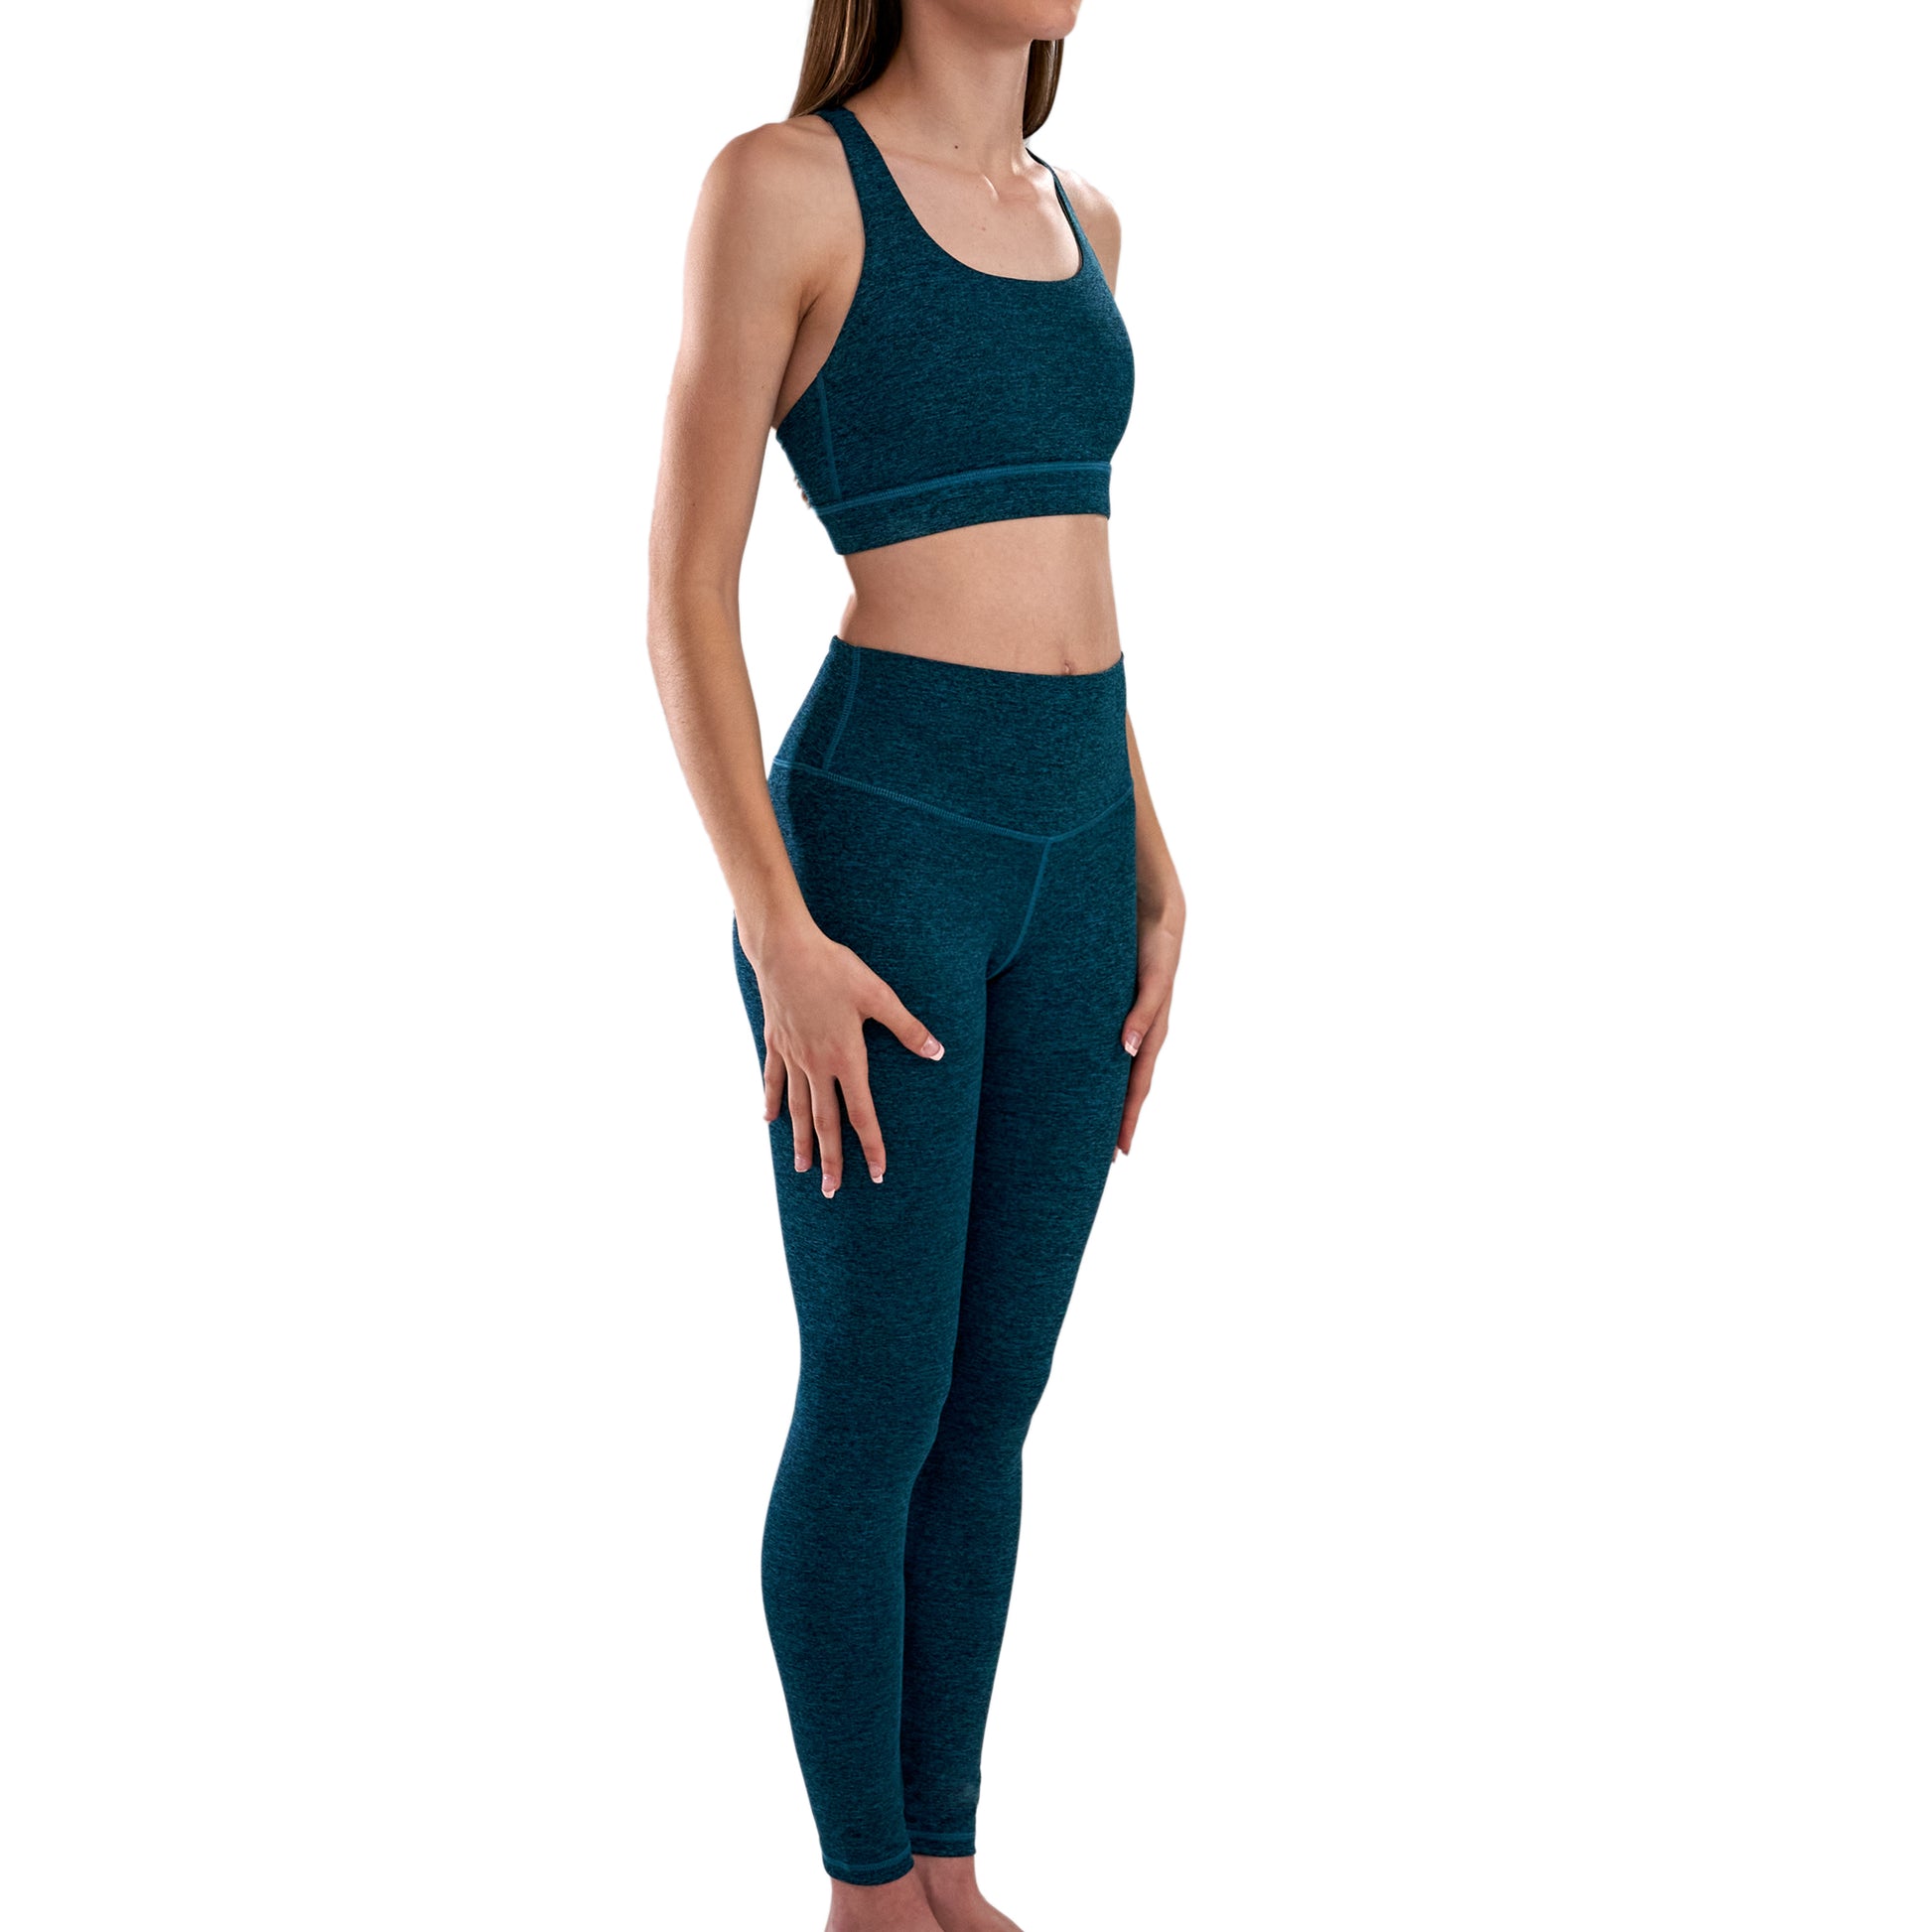 G GATLING Women's high Waisted Seamless Compression Leggings for